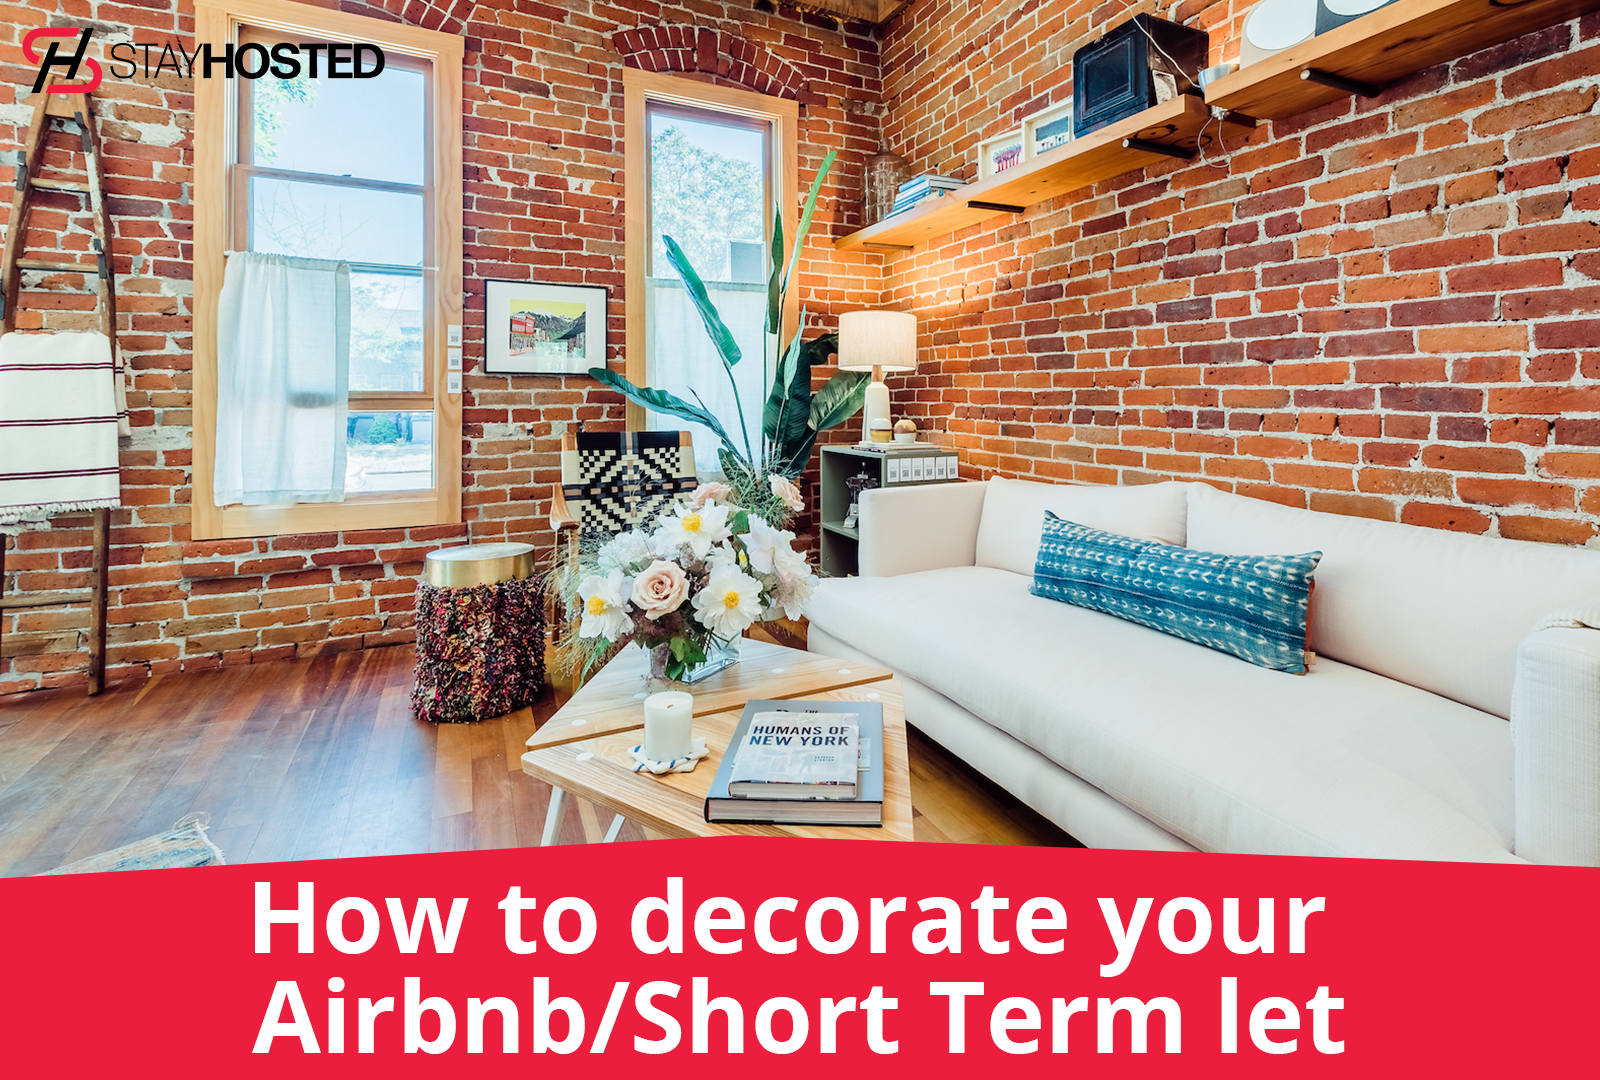 How to decorate an Airbnb / holiday let